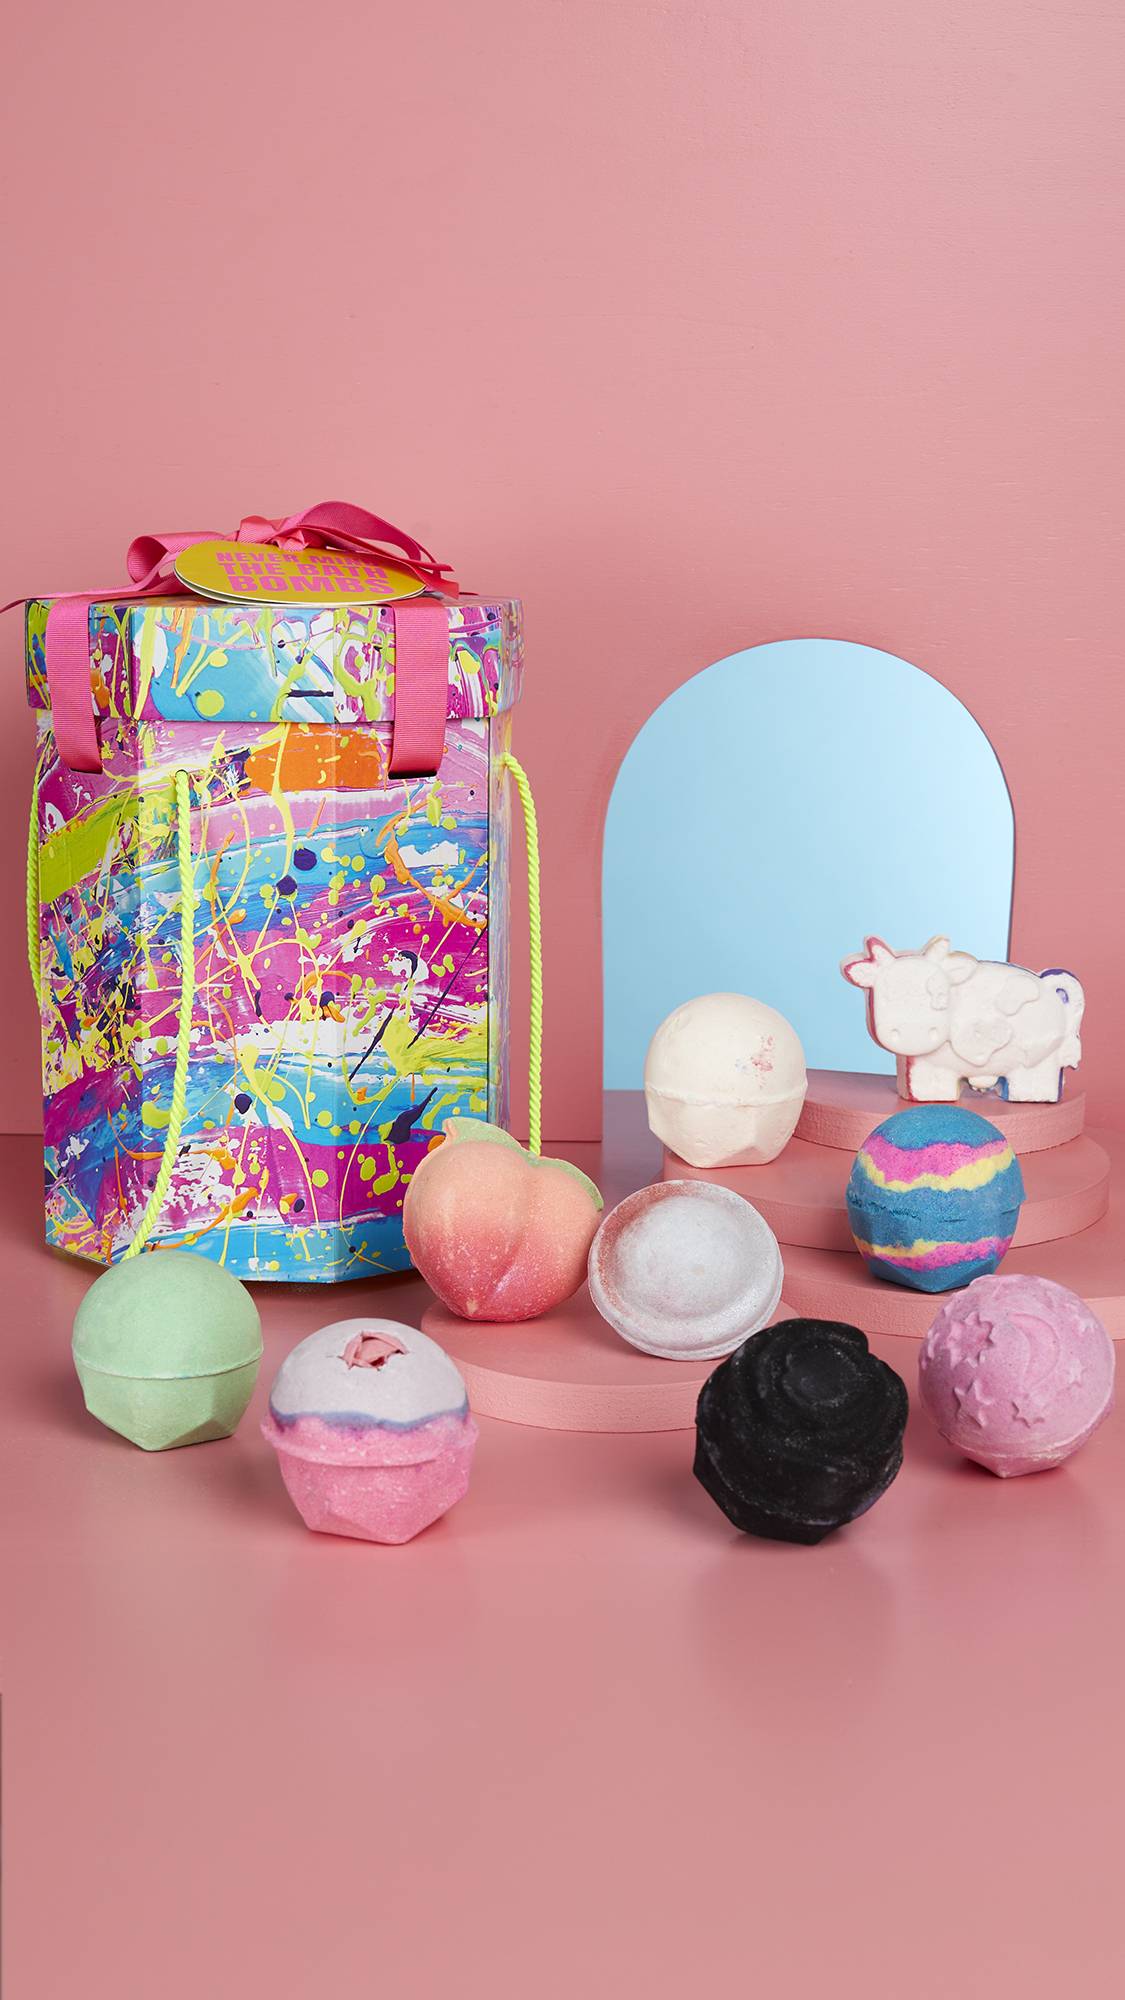 The Never Mind The Bath Bombs gift box is standing to show its full size. It is standing with the nine bath bombs on a pastel pink background. There is an arched mirror behind the products. 